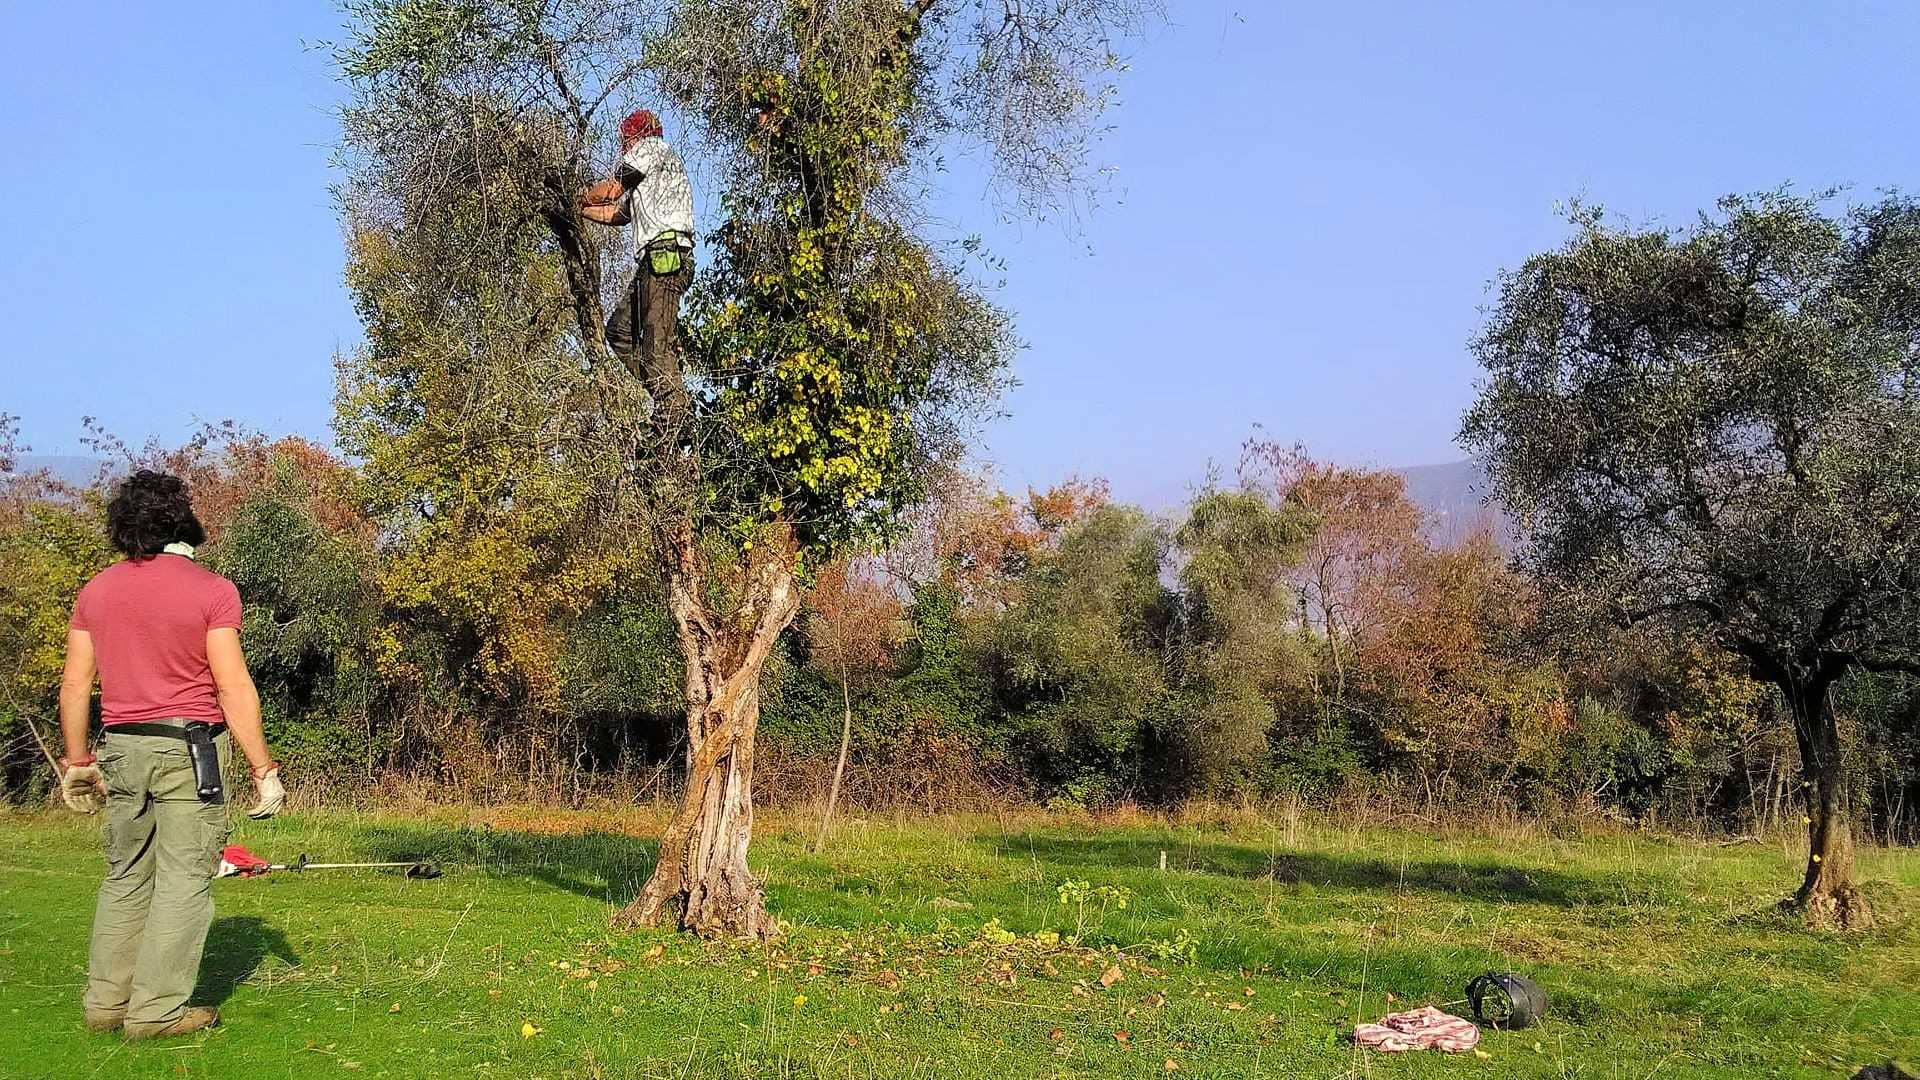 business-europe-production-world-on-shores-of-lake-garda-volunteers-harvest-abandoned-trees-for-charity-olive-oil-times